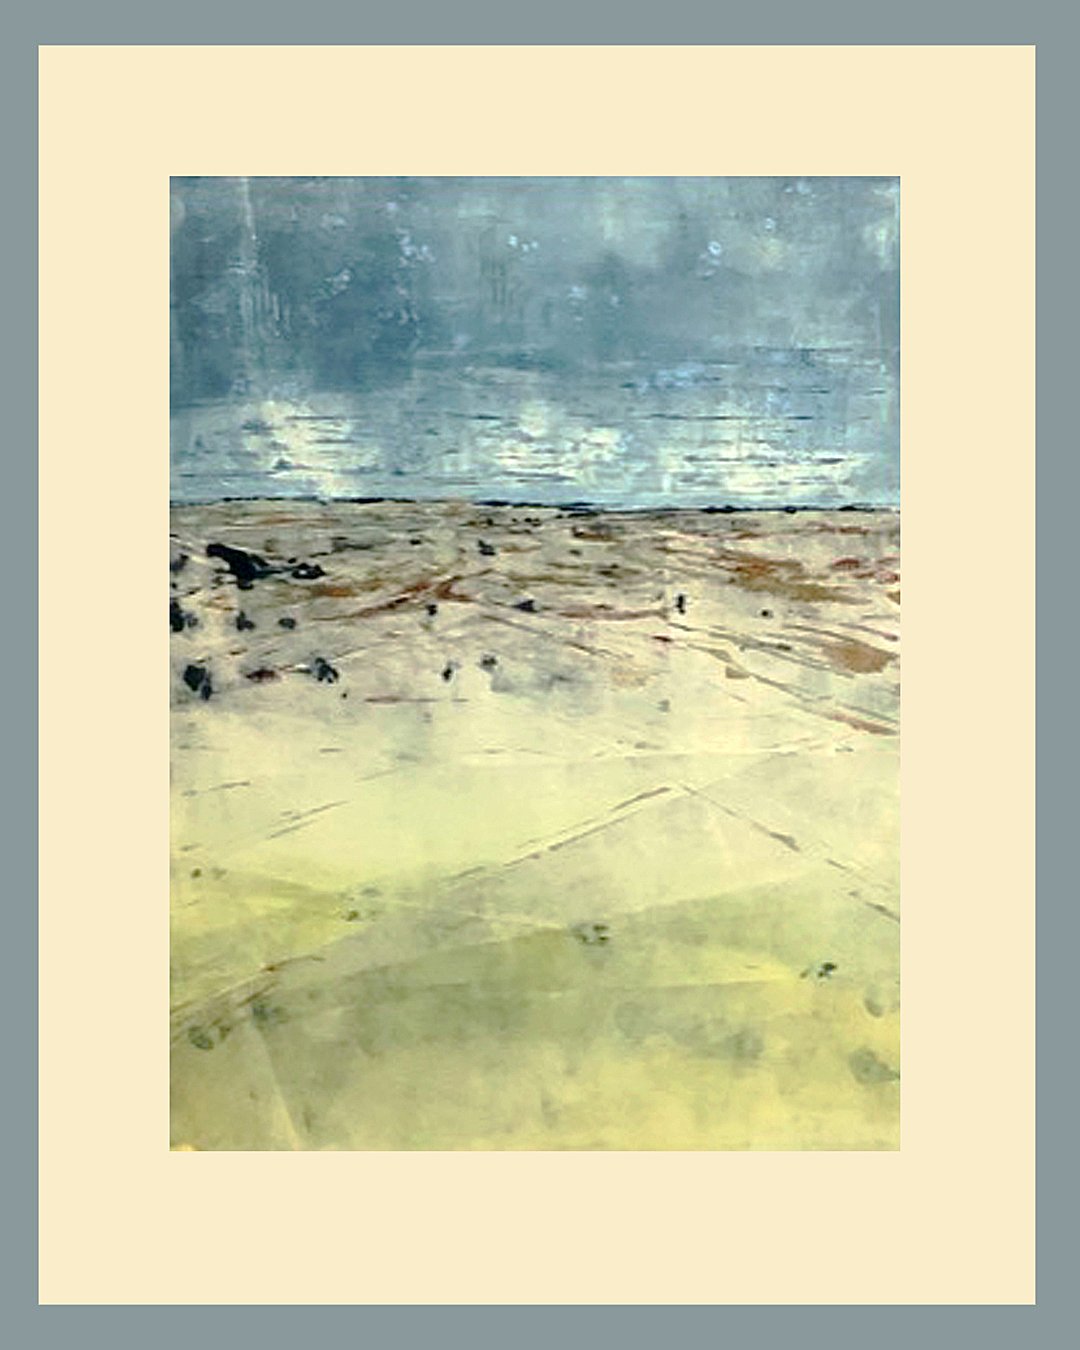    Playa  , was inspired by a trip to Summer Lake. Summer lake is an intermittent high-desert lake in Lake County, Oregon.  Custom Framed/Matted in a light blue wood frame @ 24 x 20 Mixed Media Monotype,1/1   $435    